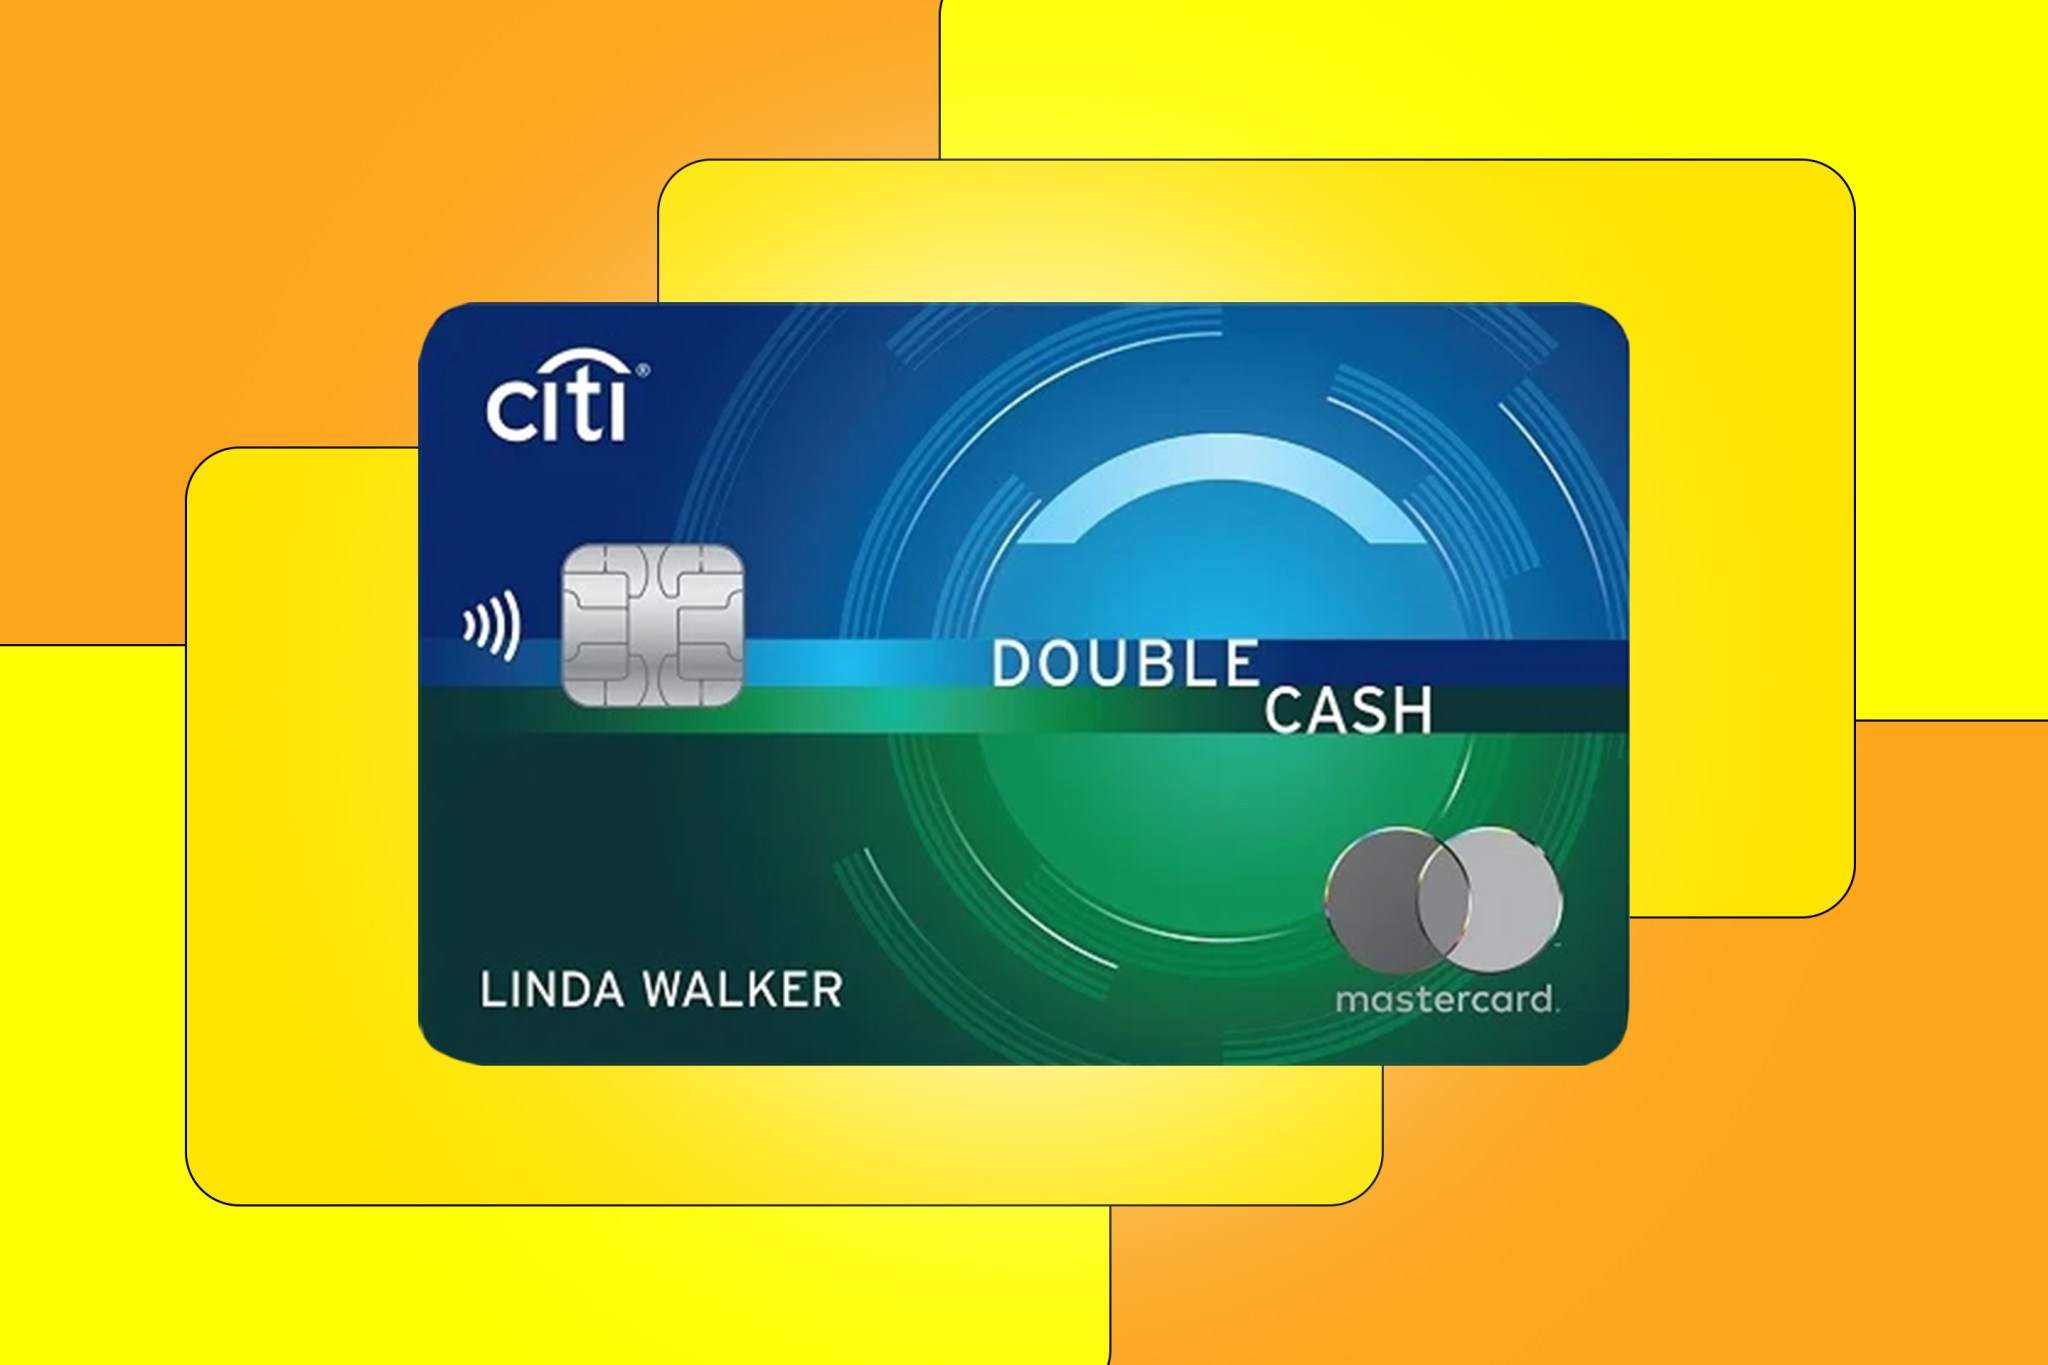 Citi Double Cash CardReview: earn 2% cash back on every purchase